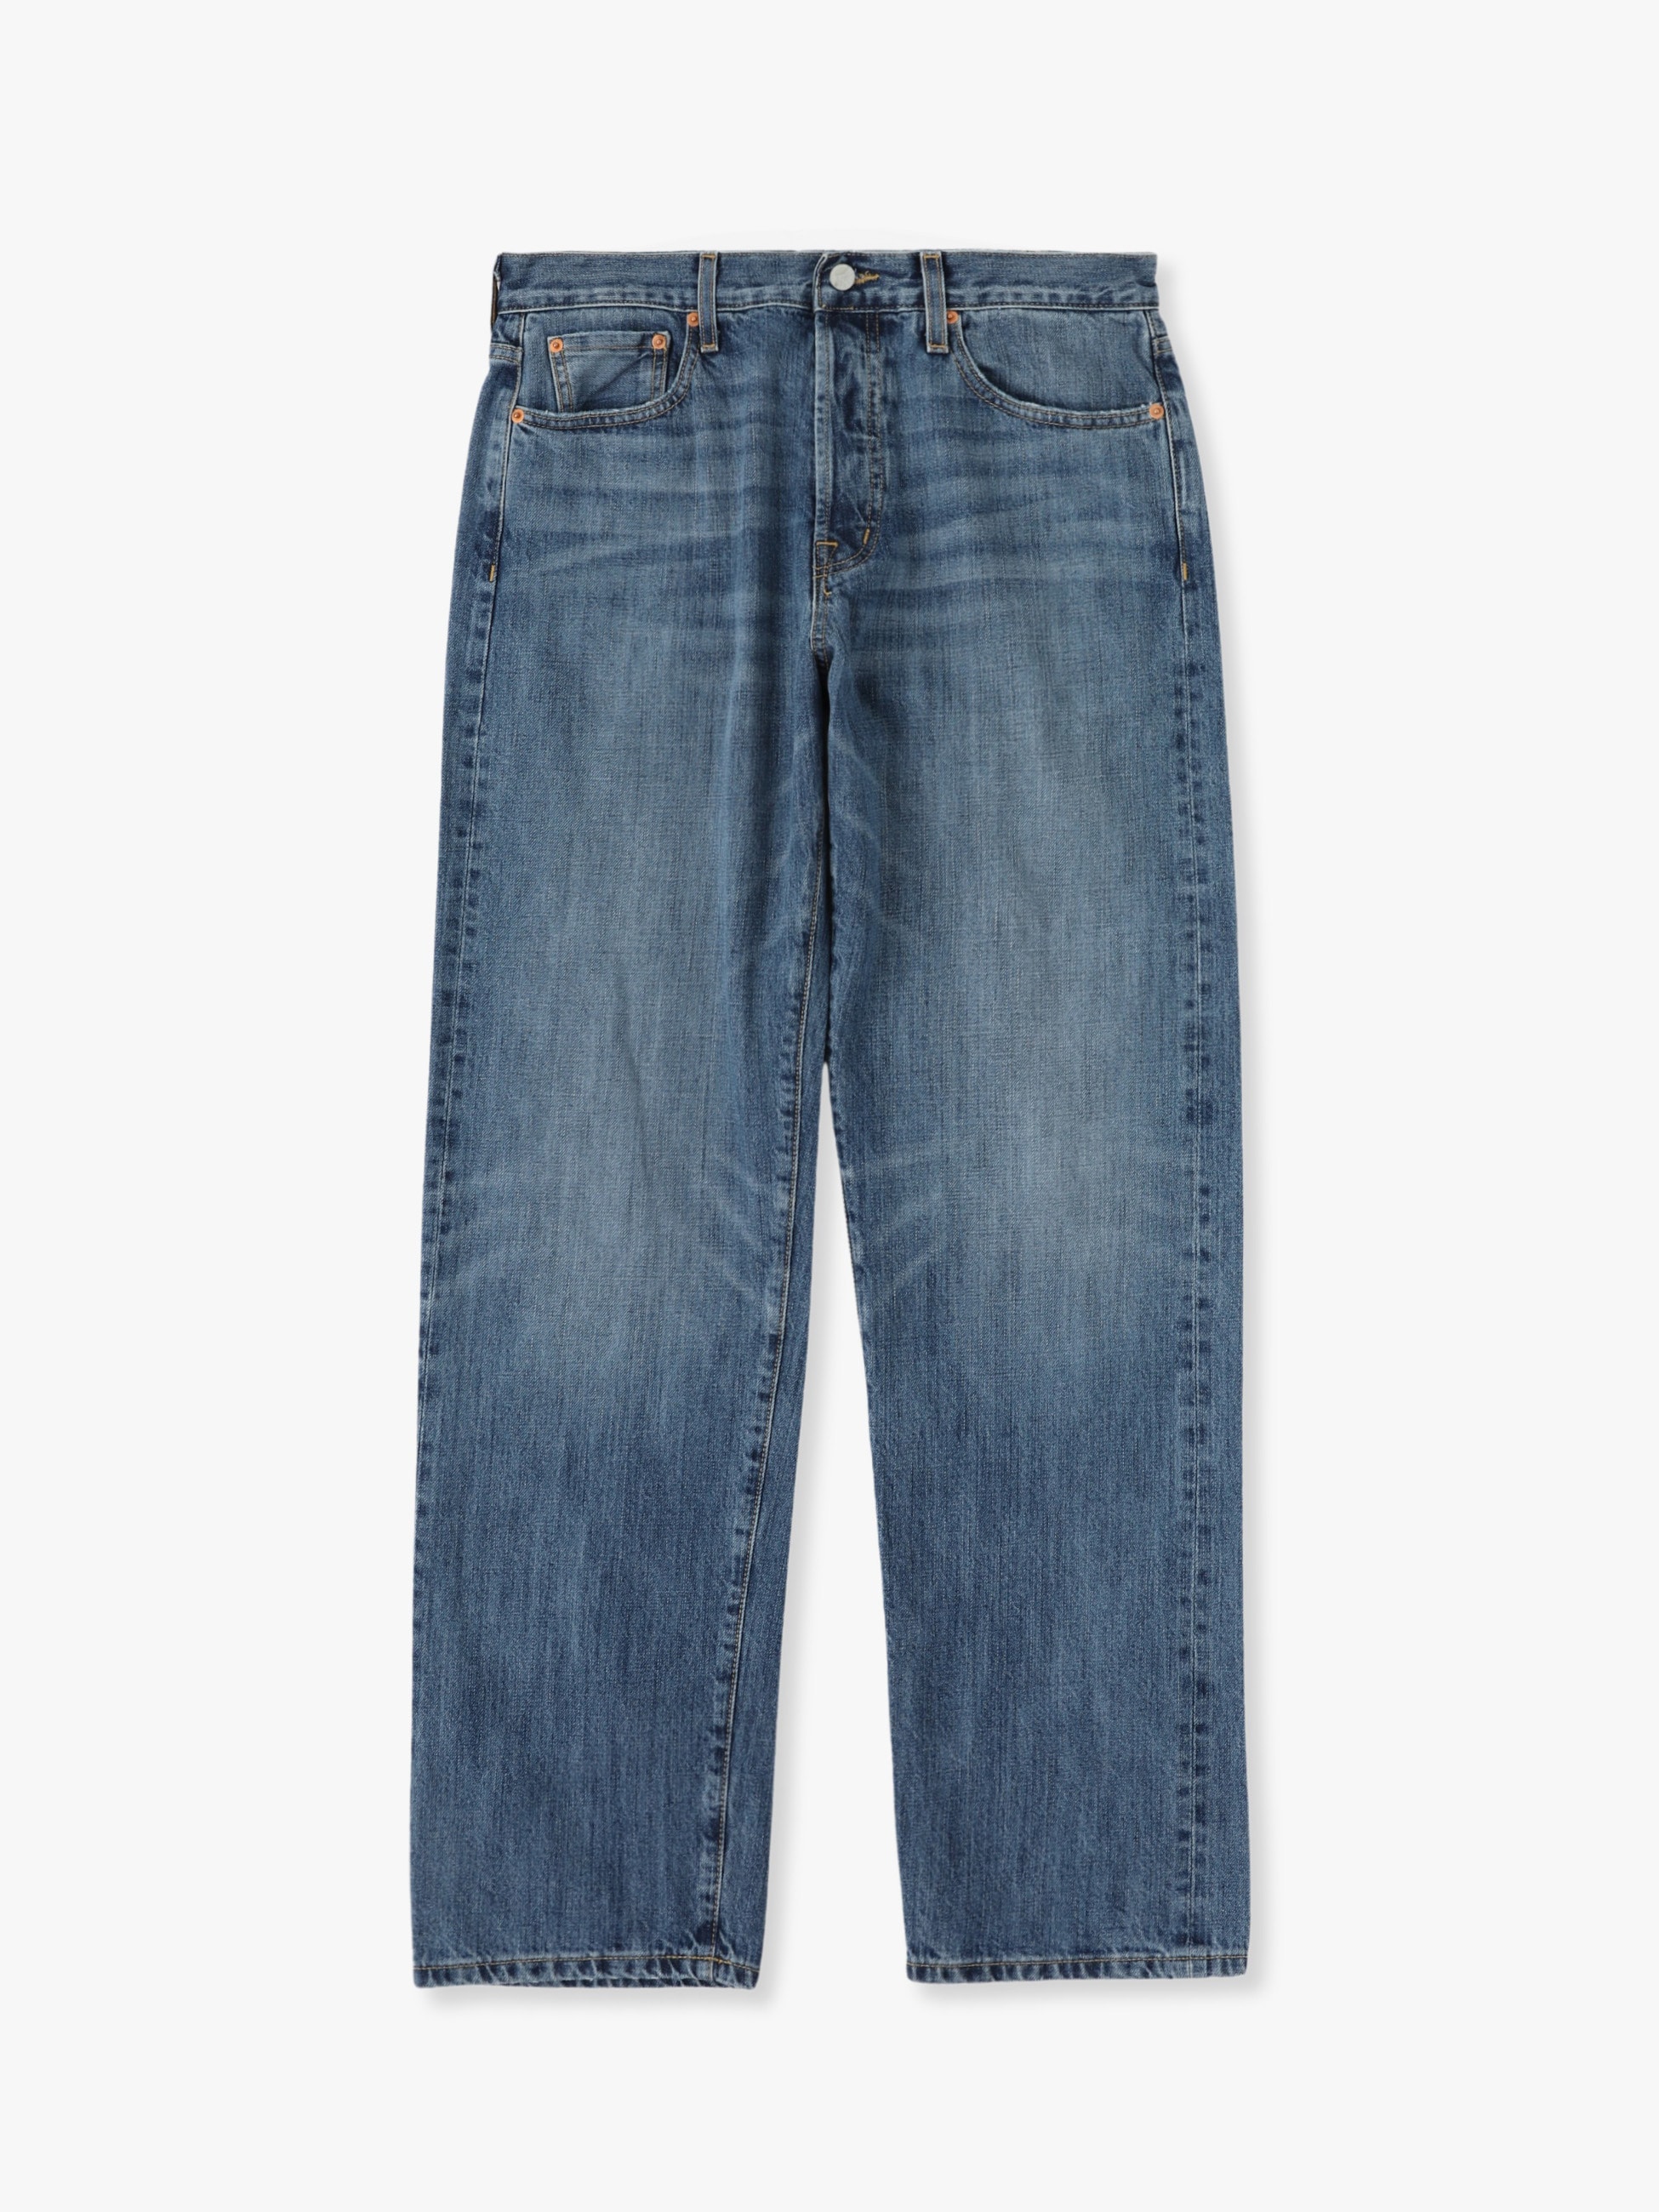 Statesman Relaxed Fit Denim Pants｜OUTERKNOWN(アウターノウン)｜Ron 